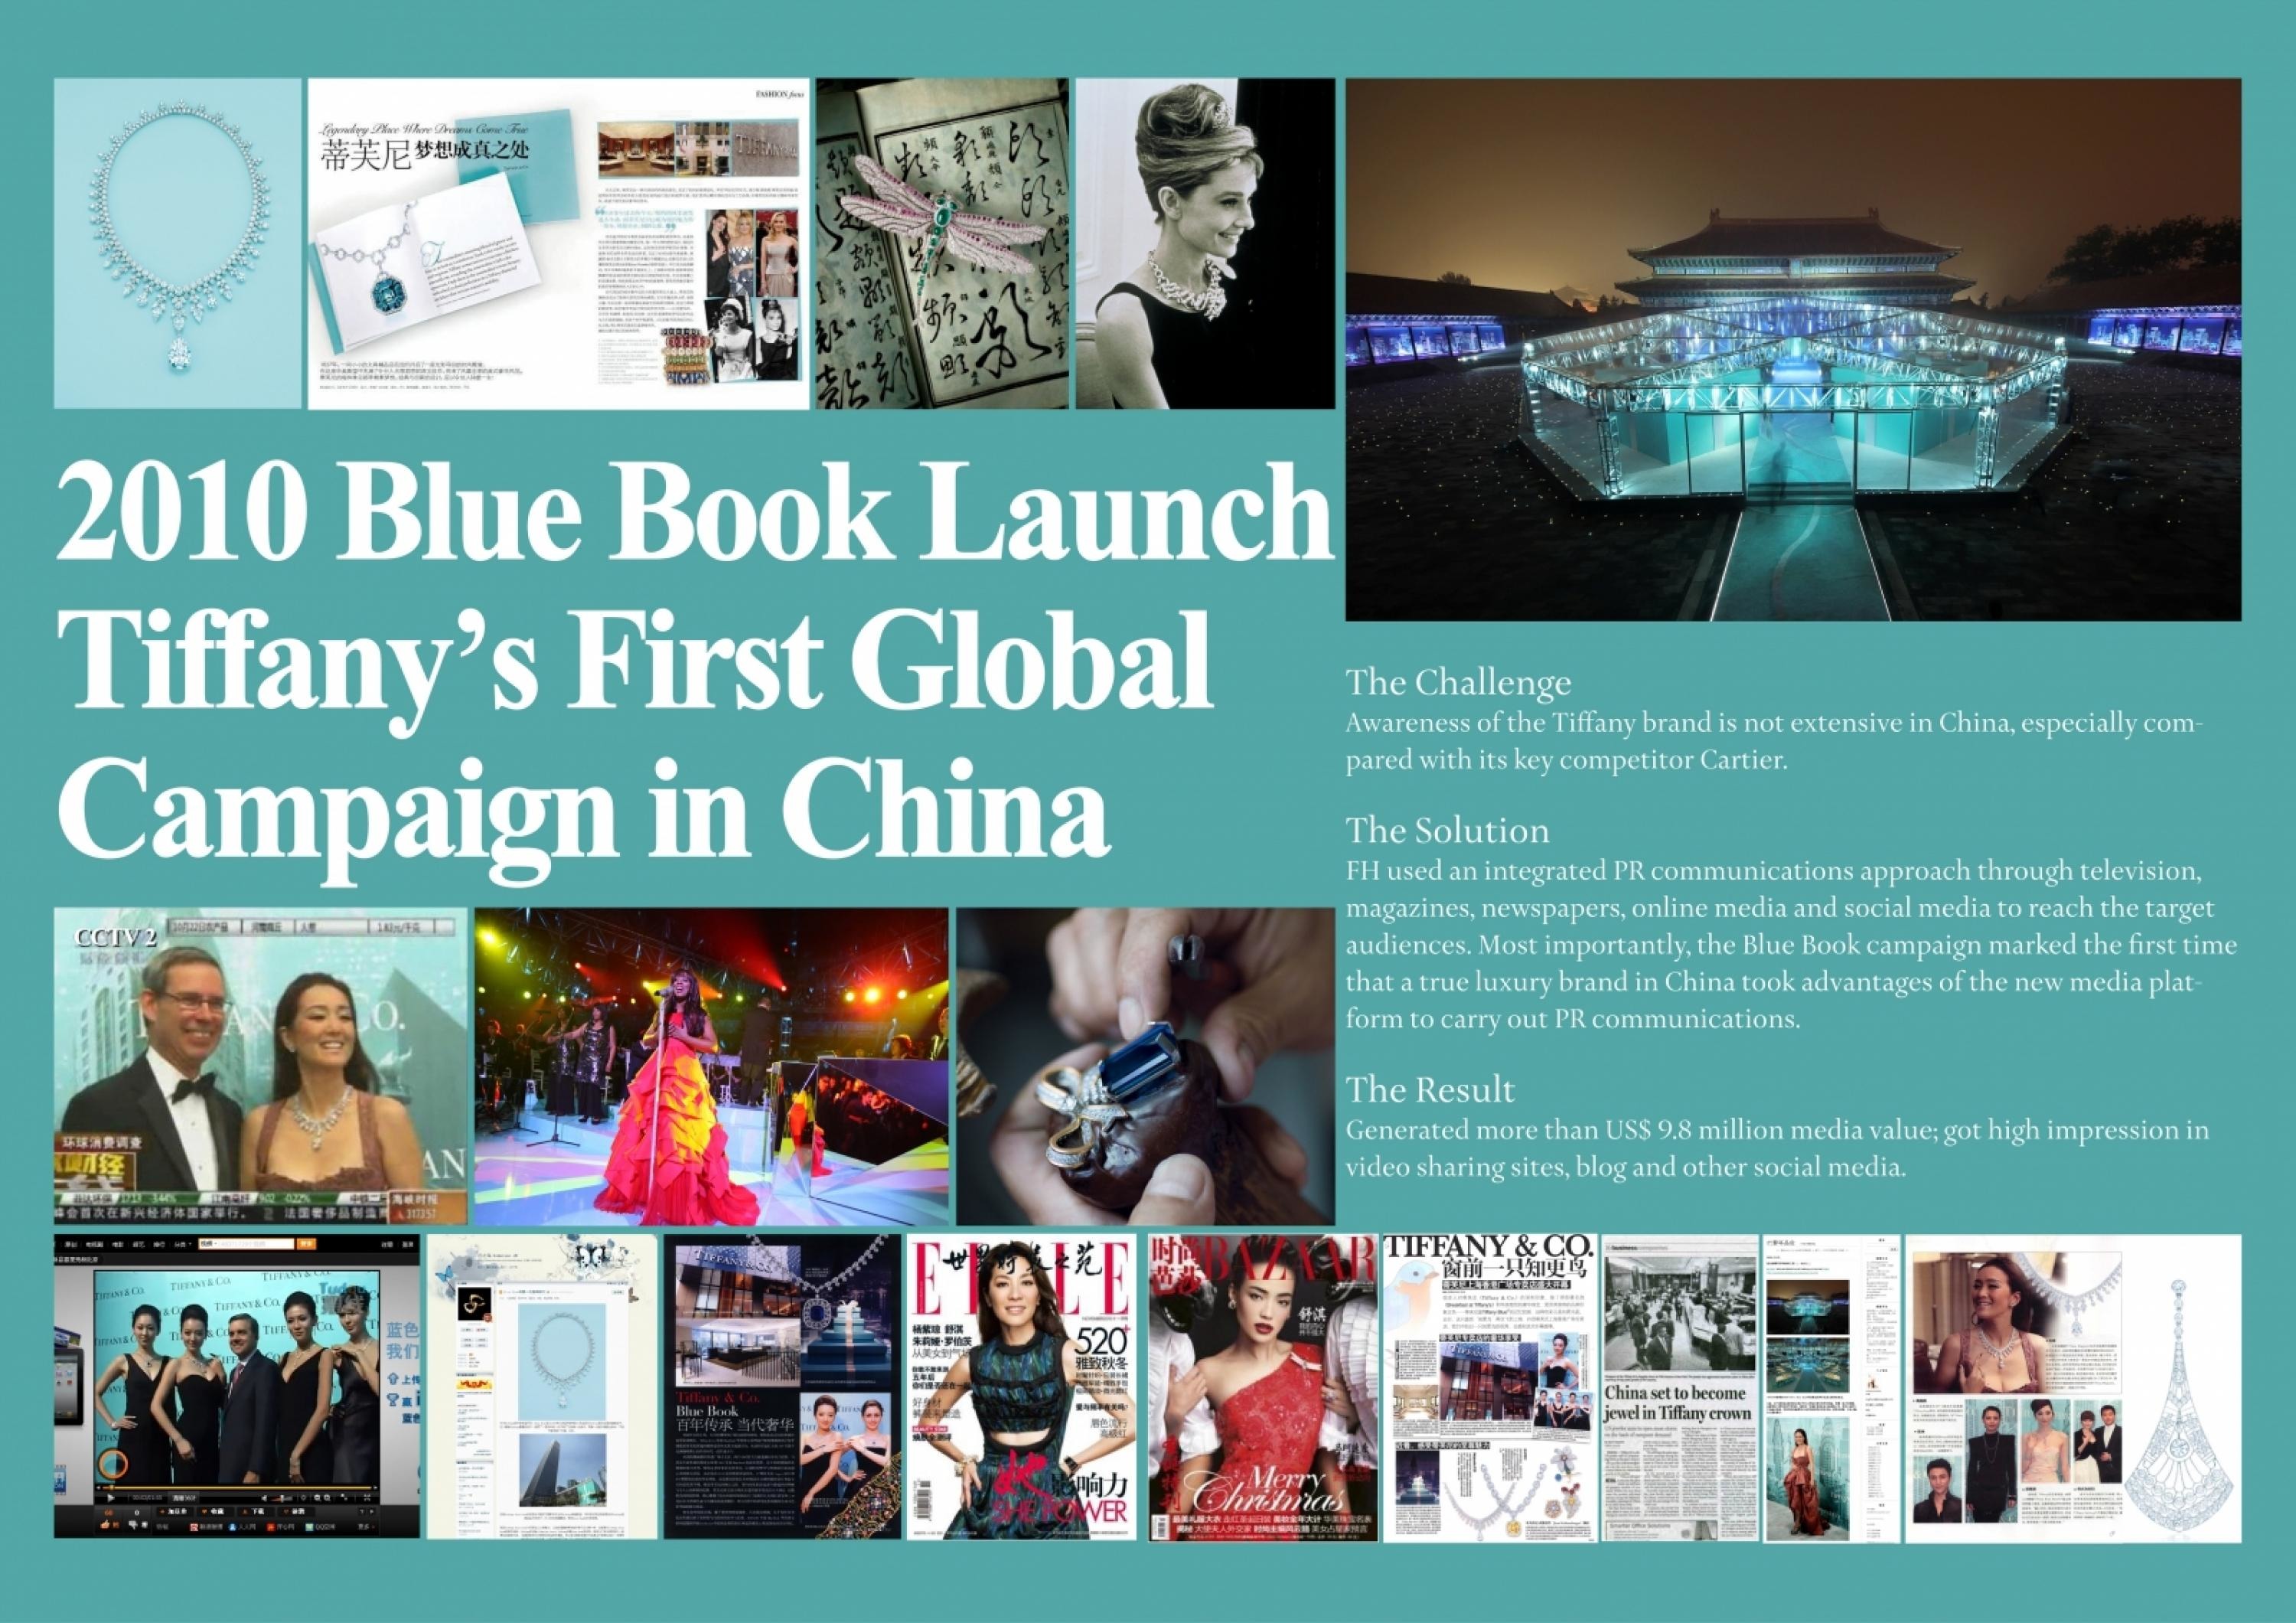 LAUNCH OF BLUE BOOK COLLECTION